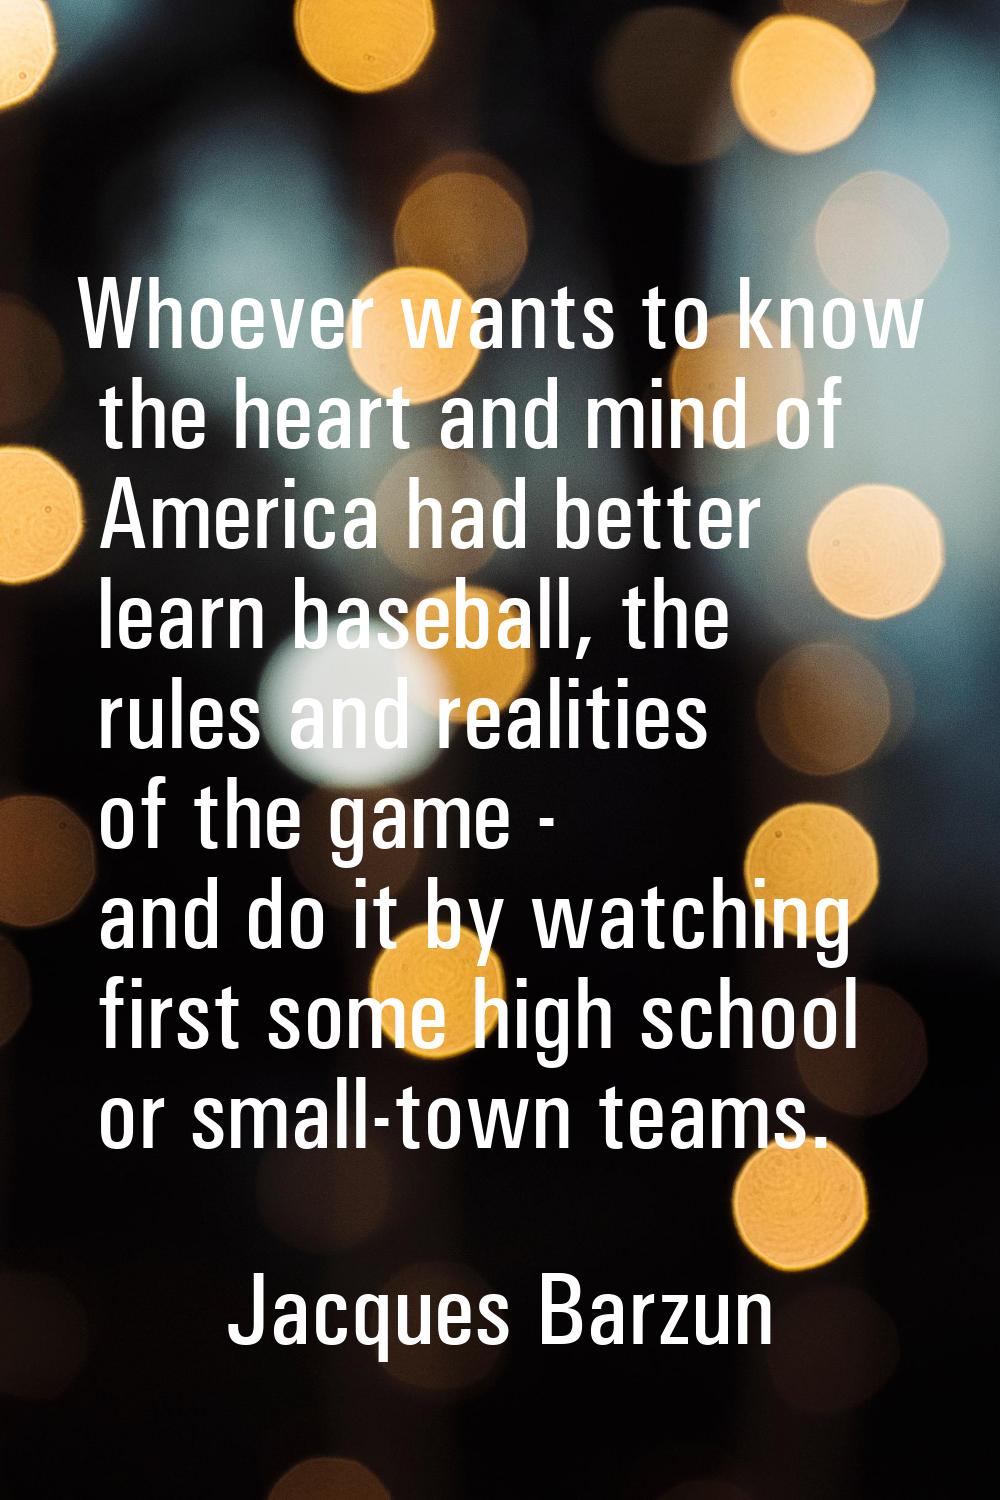 Whoever wants to know the heart and mind of America had better learn baseball, the rules and realit